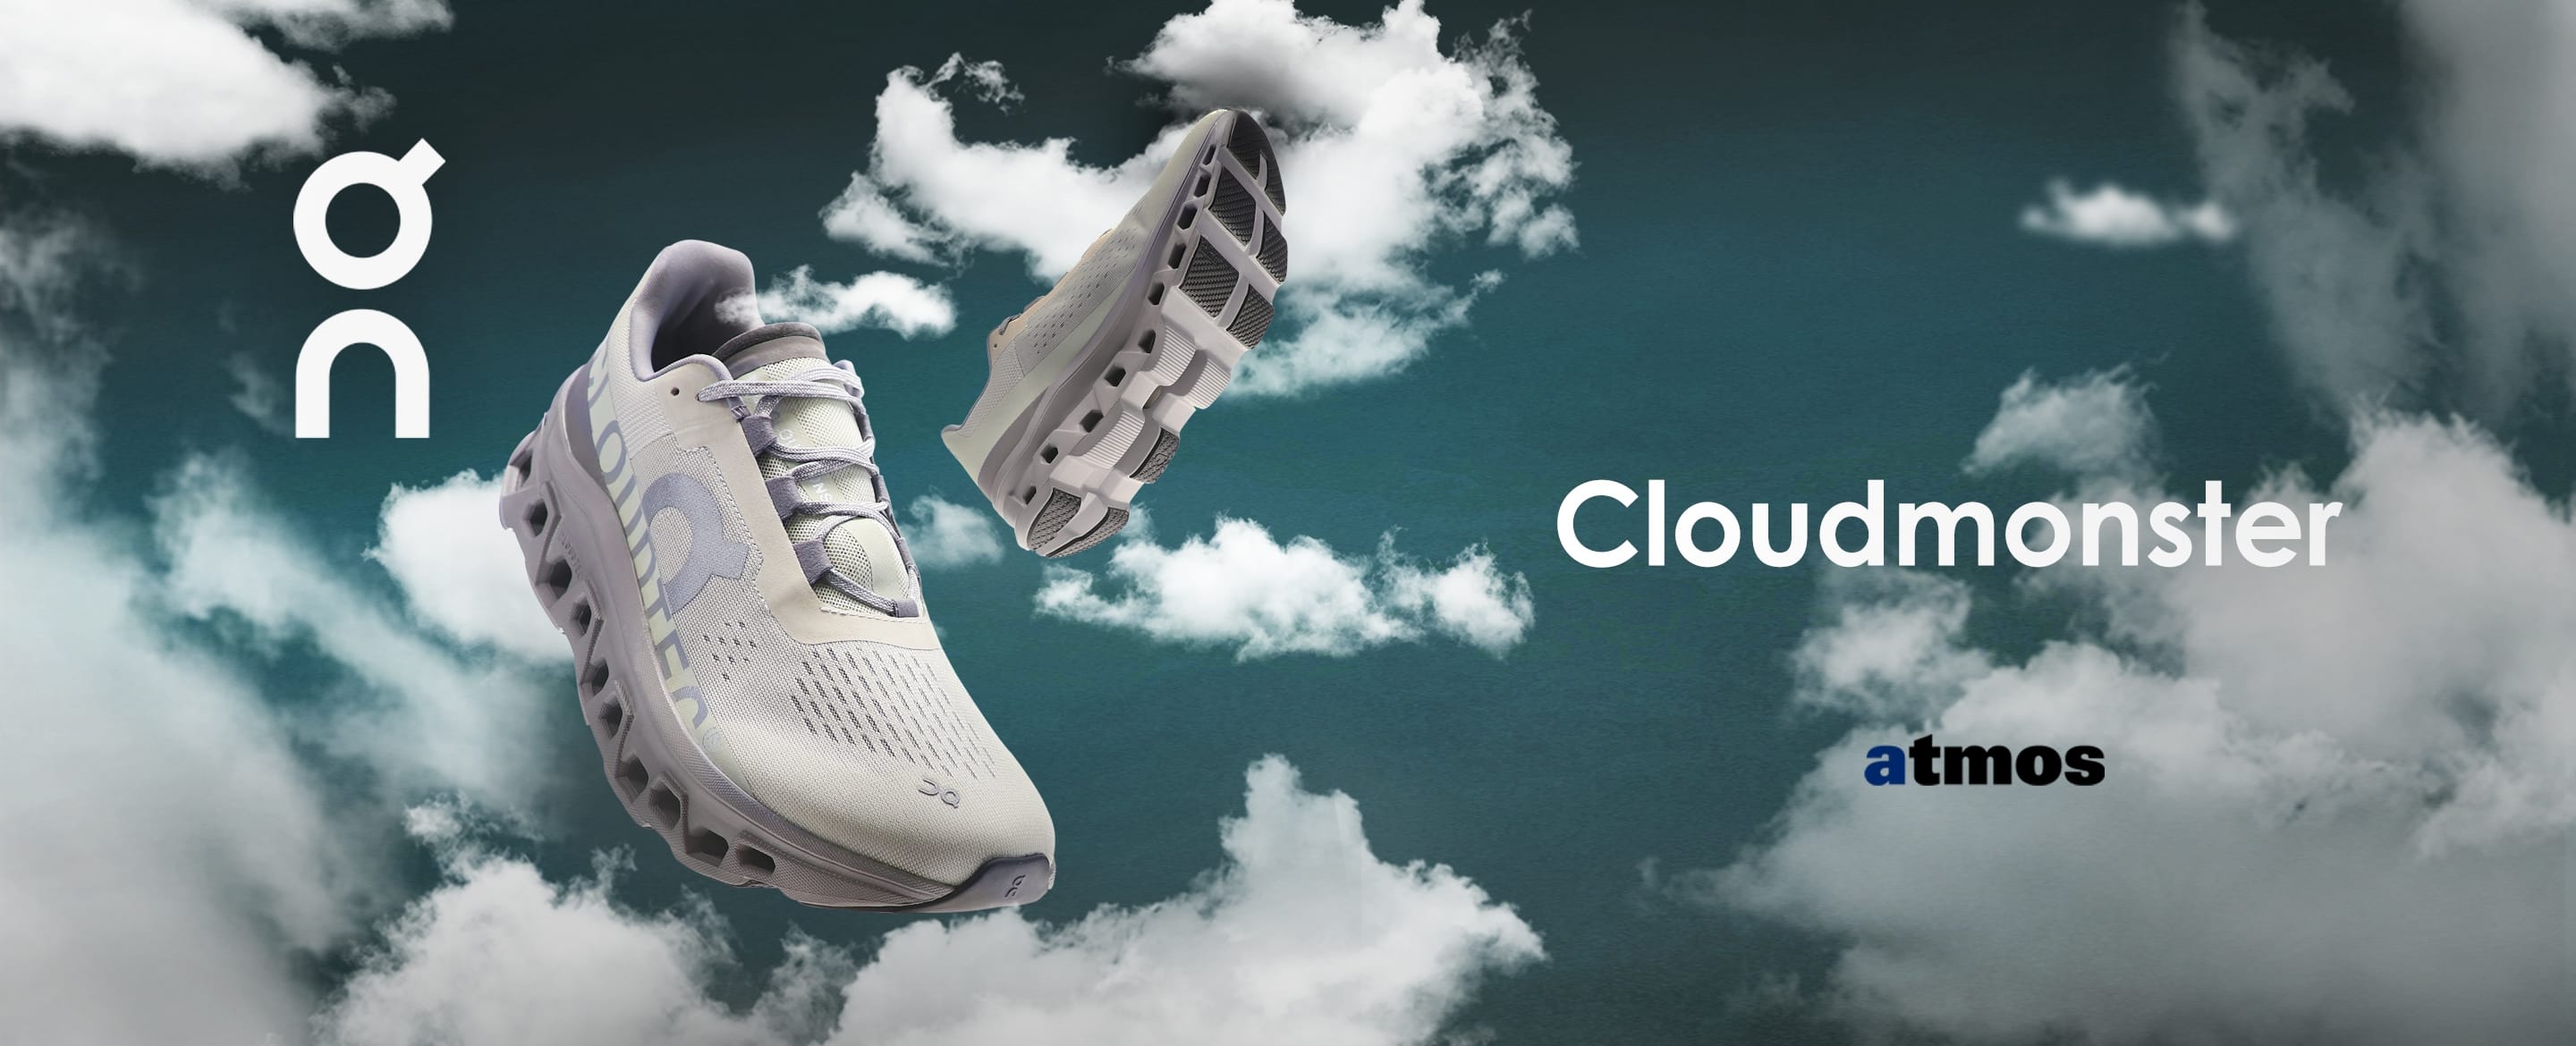 on-cloudmonster-atmos-exclusive